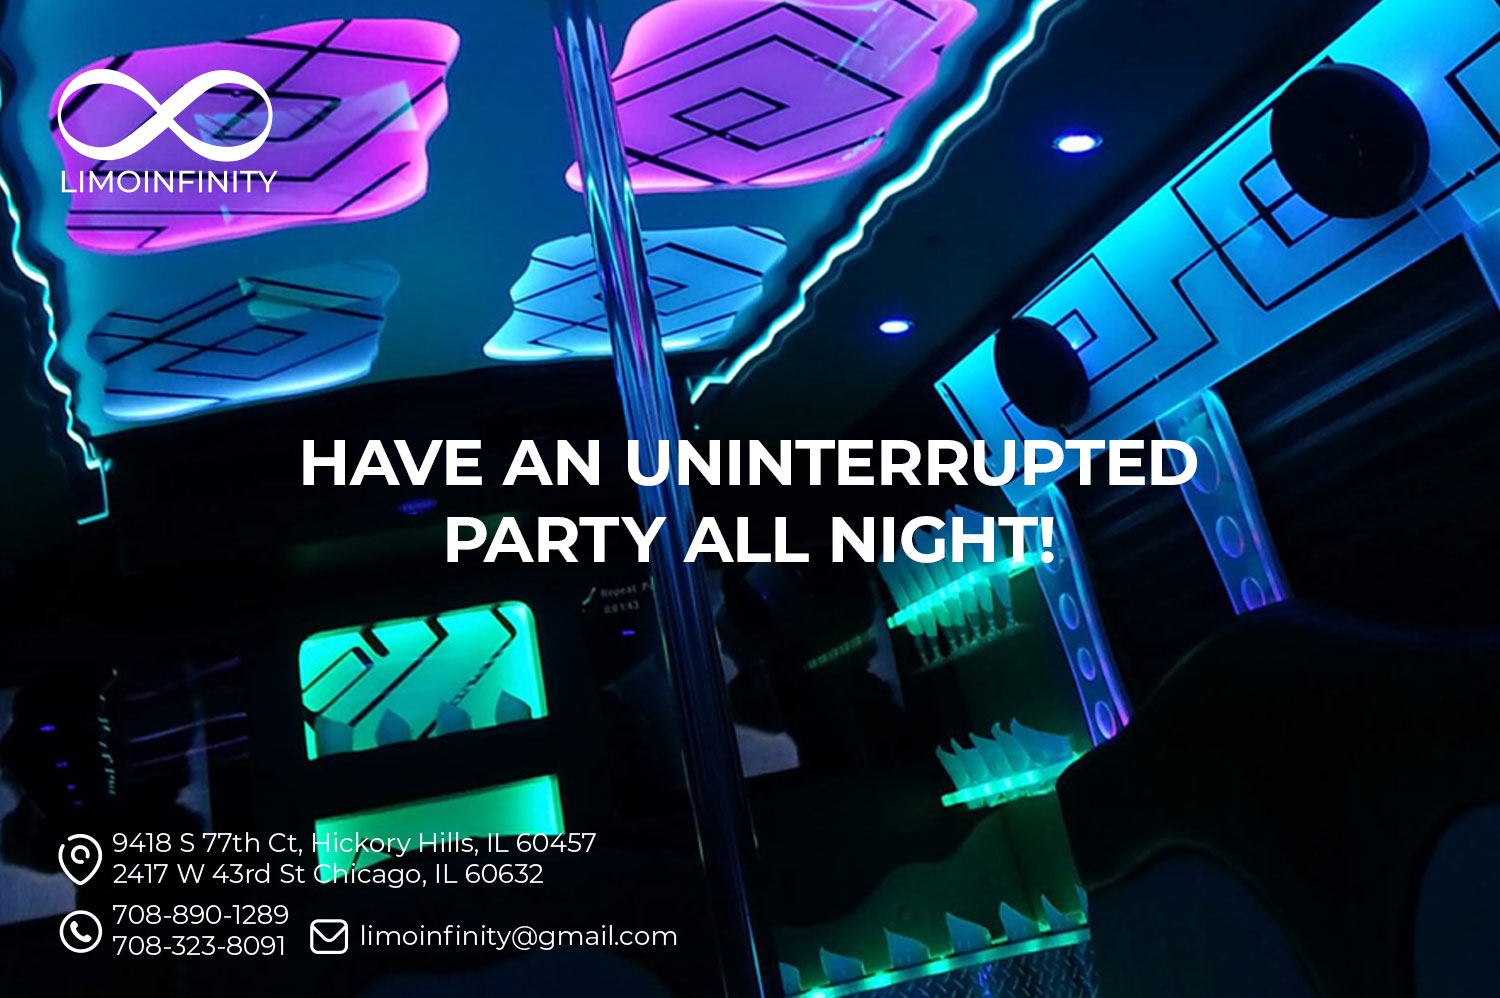 Have-an-uninterrupted-party-all-night!